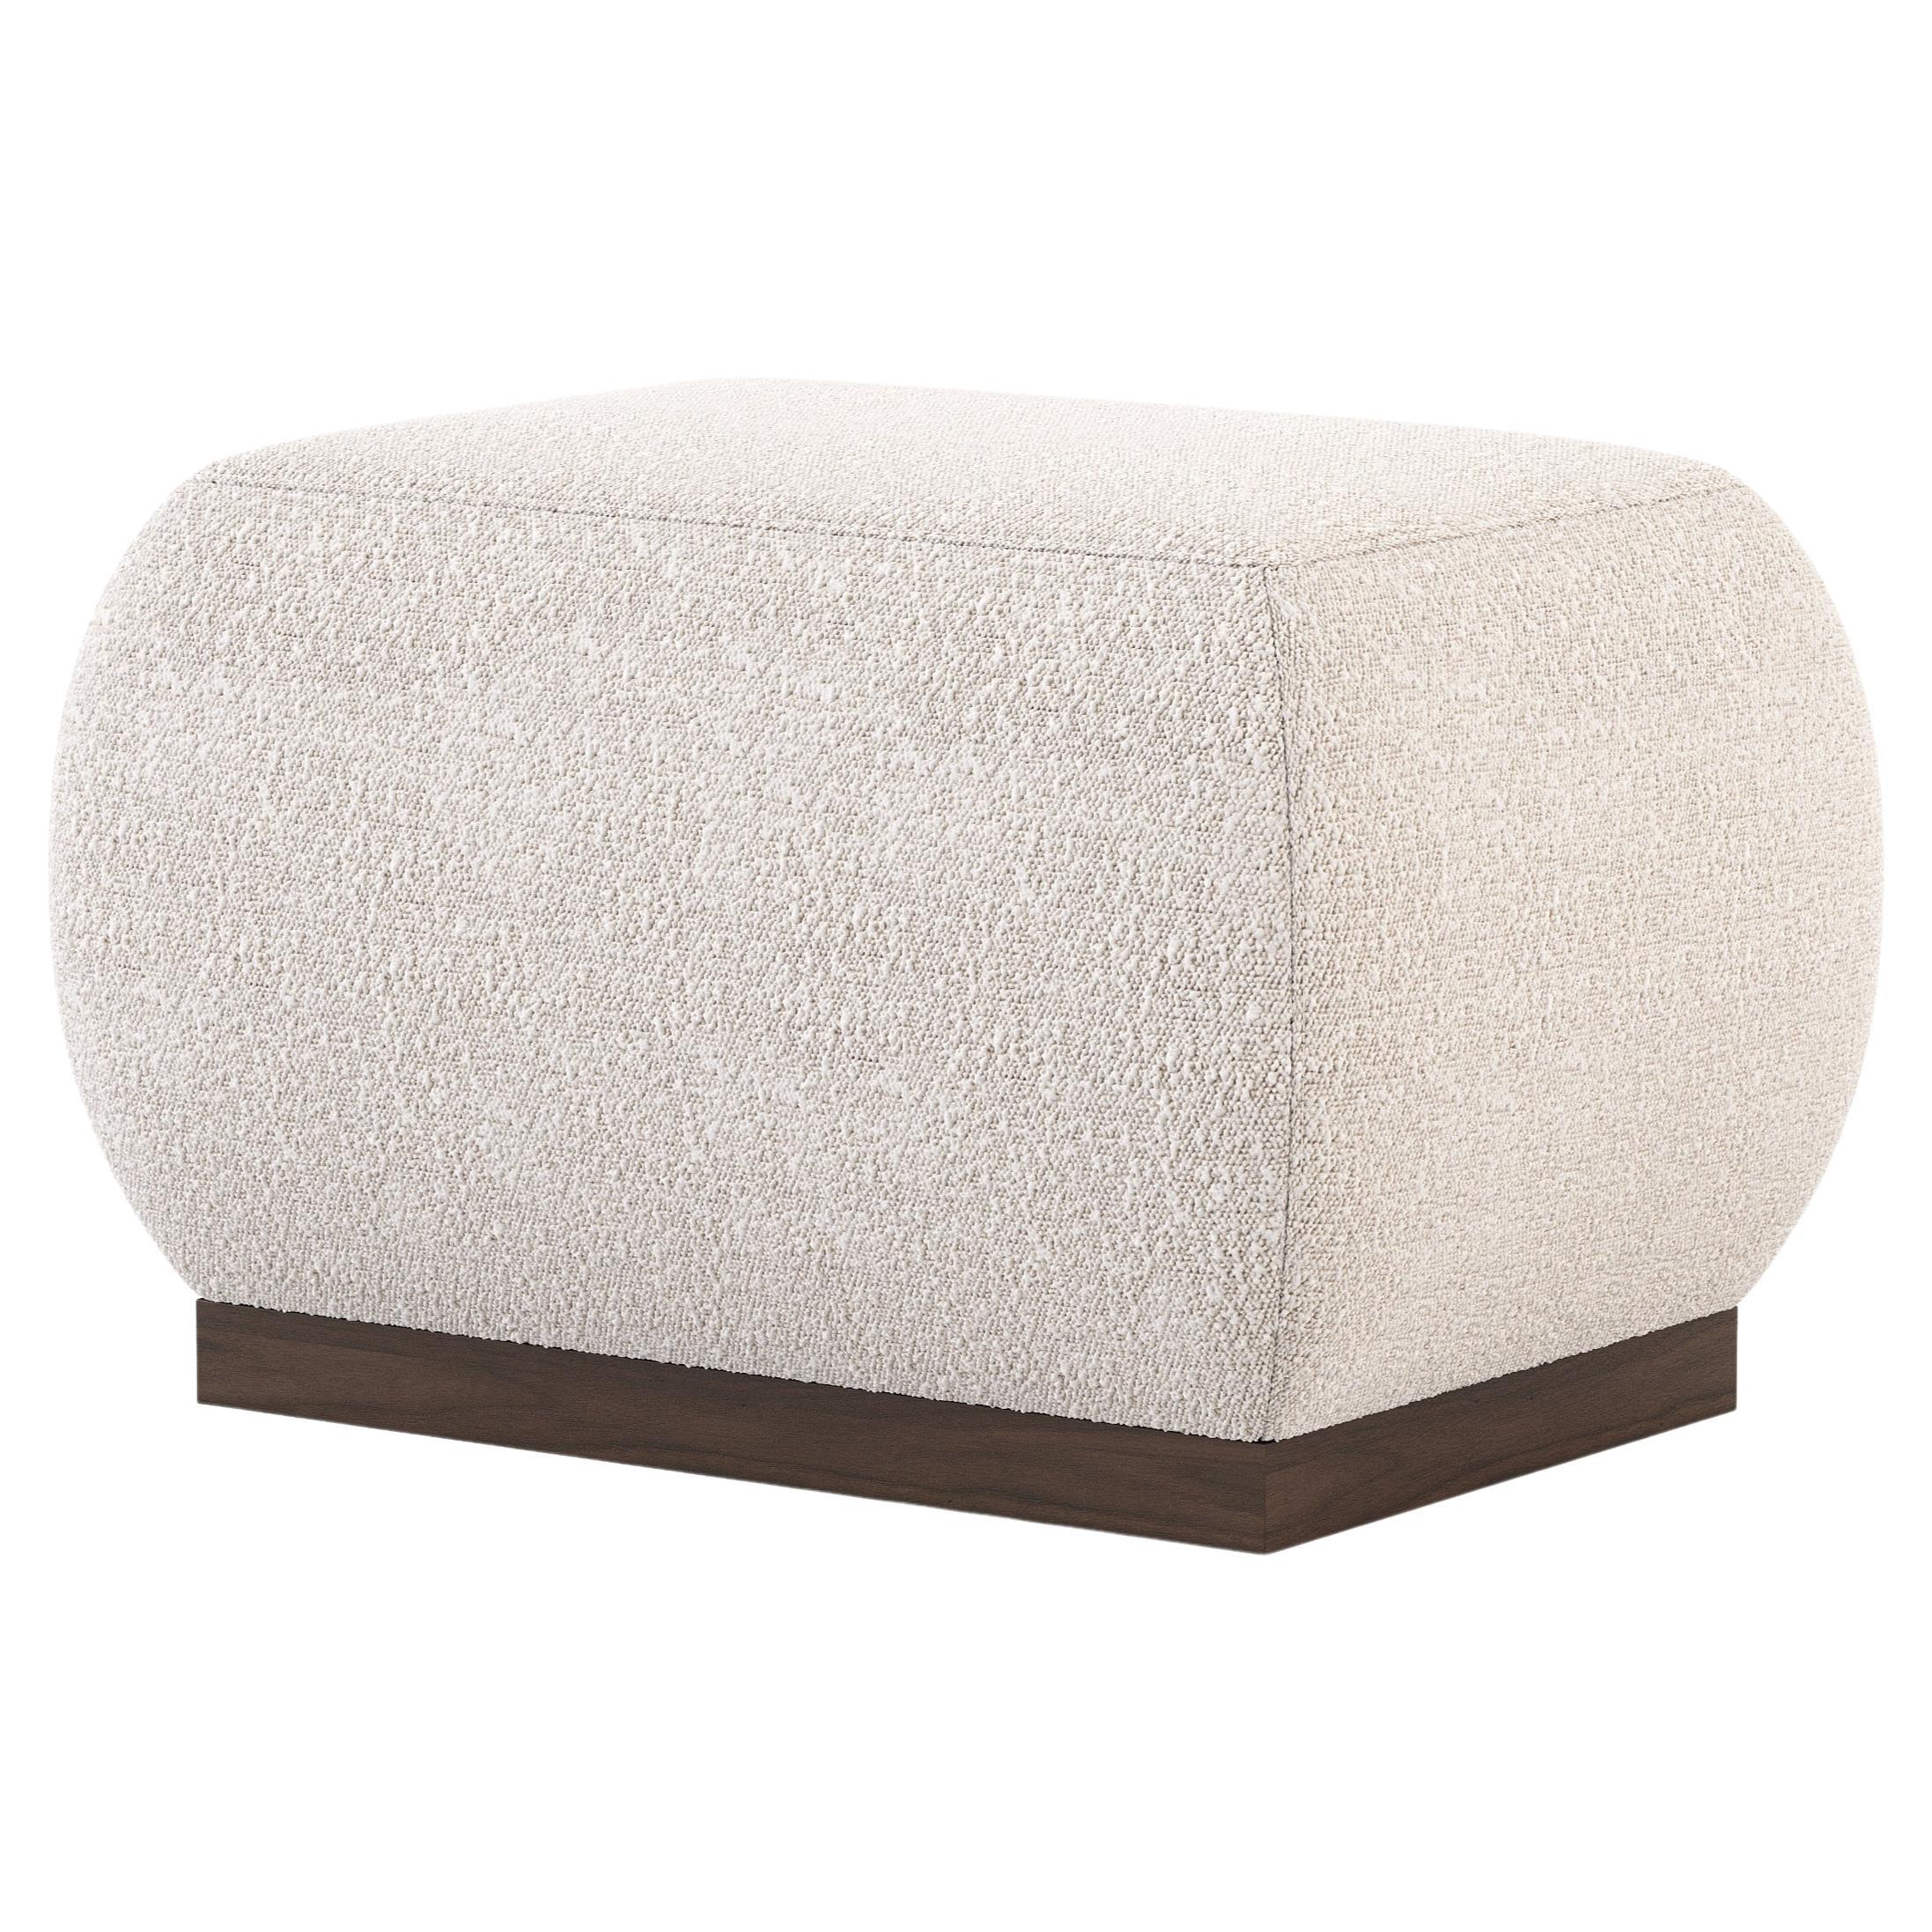 Modern Club Stool Mde with Walnut and Bouclé Textile, Handmade by Stylish Club  For Sale